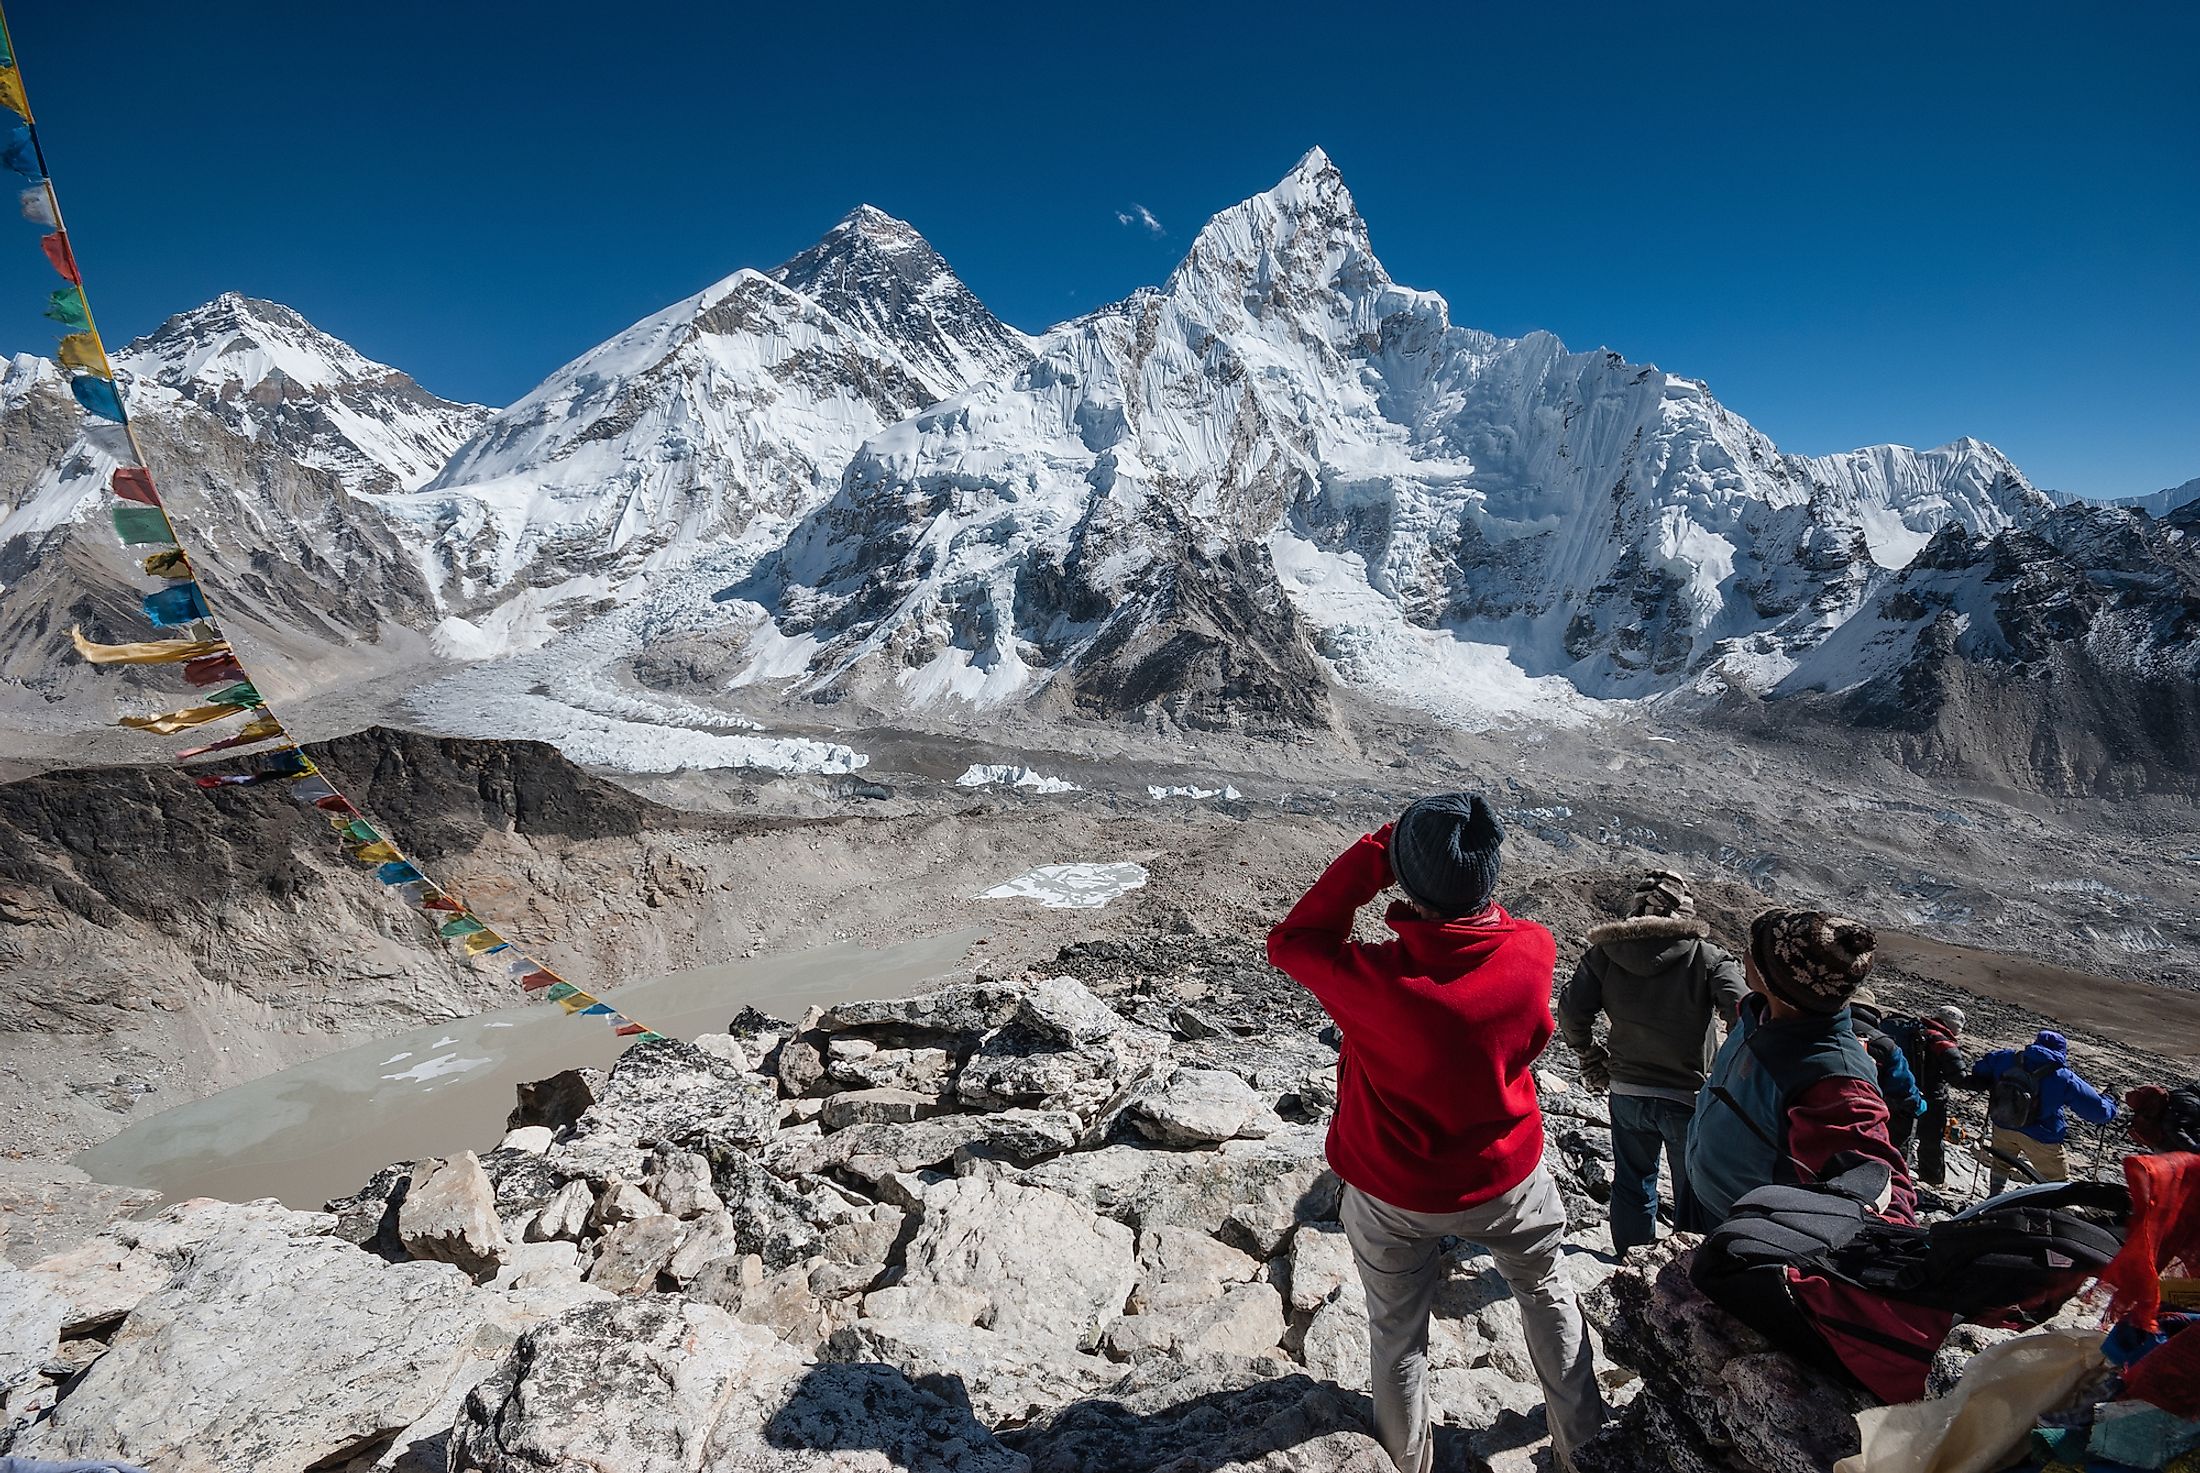 A view of Mt. Everest and Khumbu Glacier from the Kala Patthar summit, Nepal.